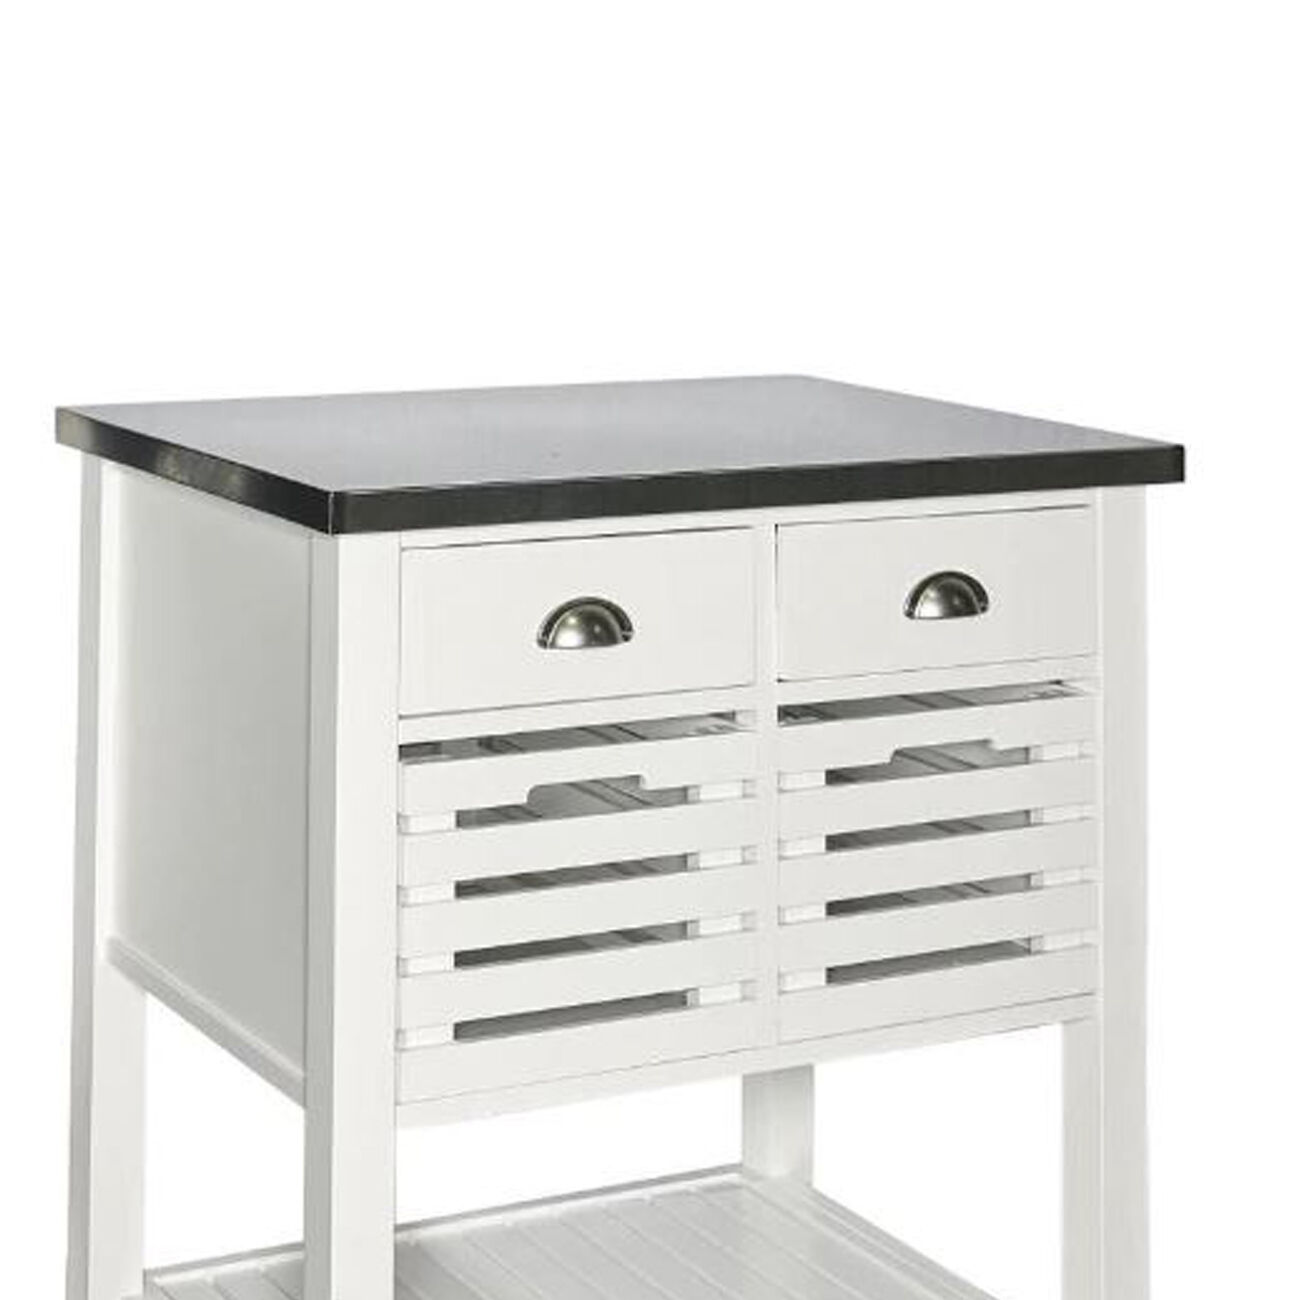 Wooden Kitchen Cart with Caster Wheels and 4 Drawers, White and Silver